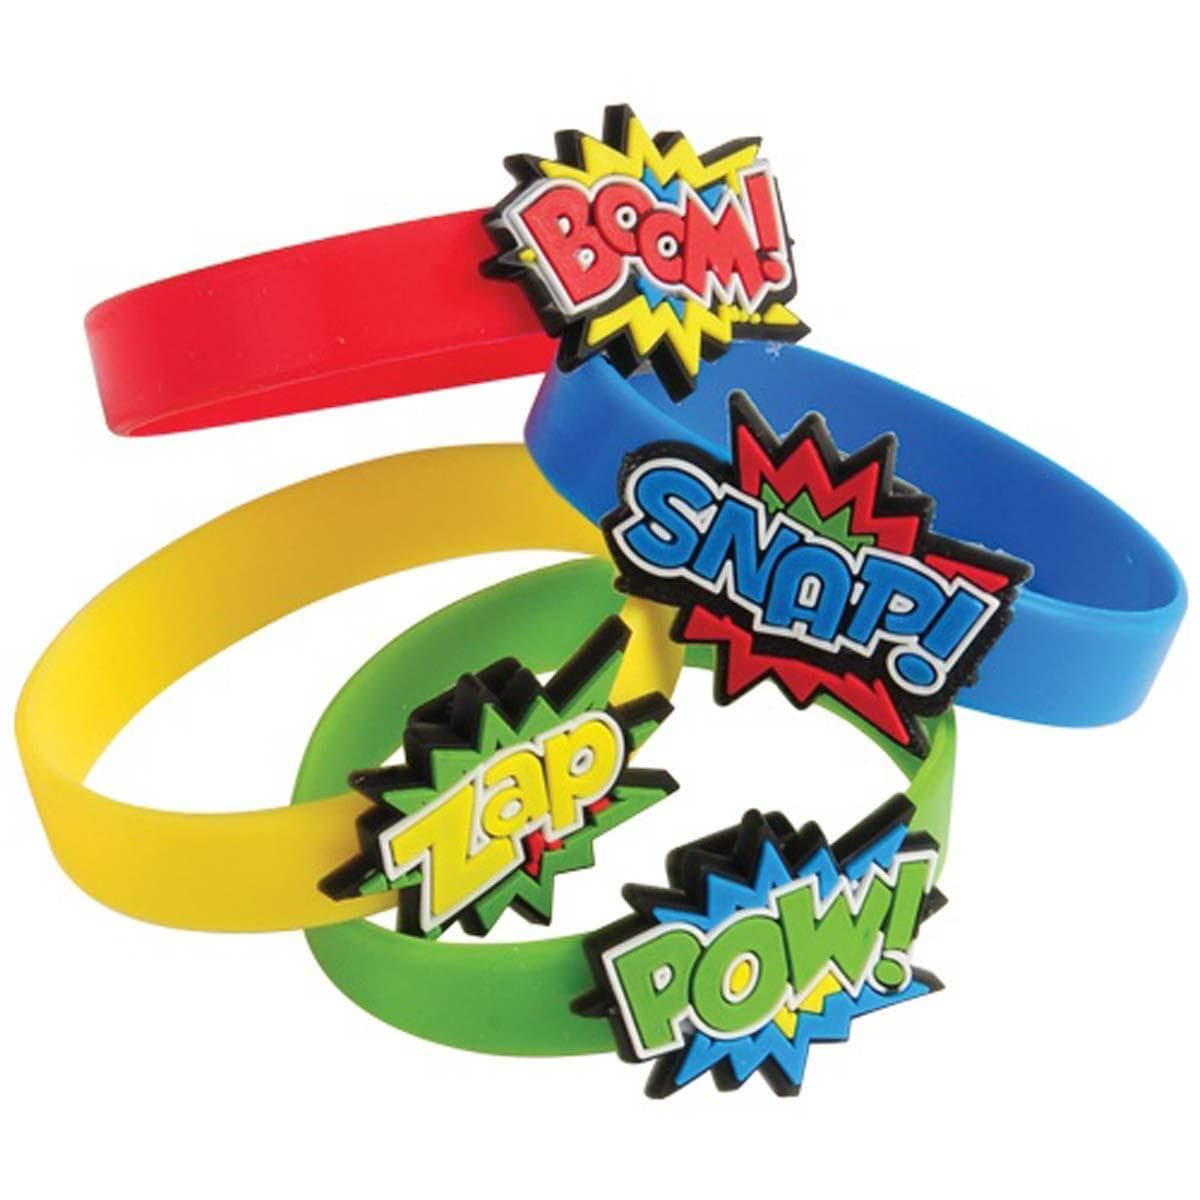 Buy Kids Birthday Superhero rubber bracelets, 12 per package sold at Party Expert